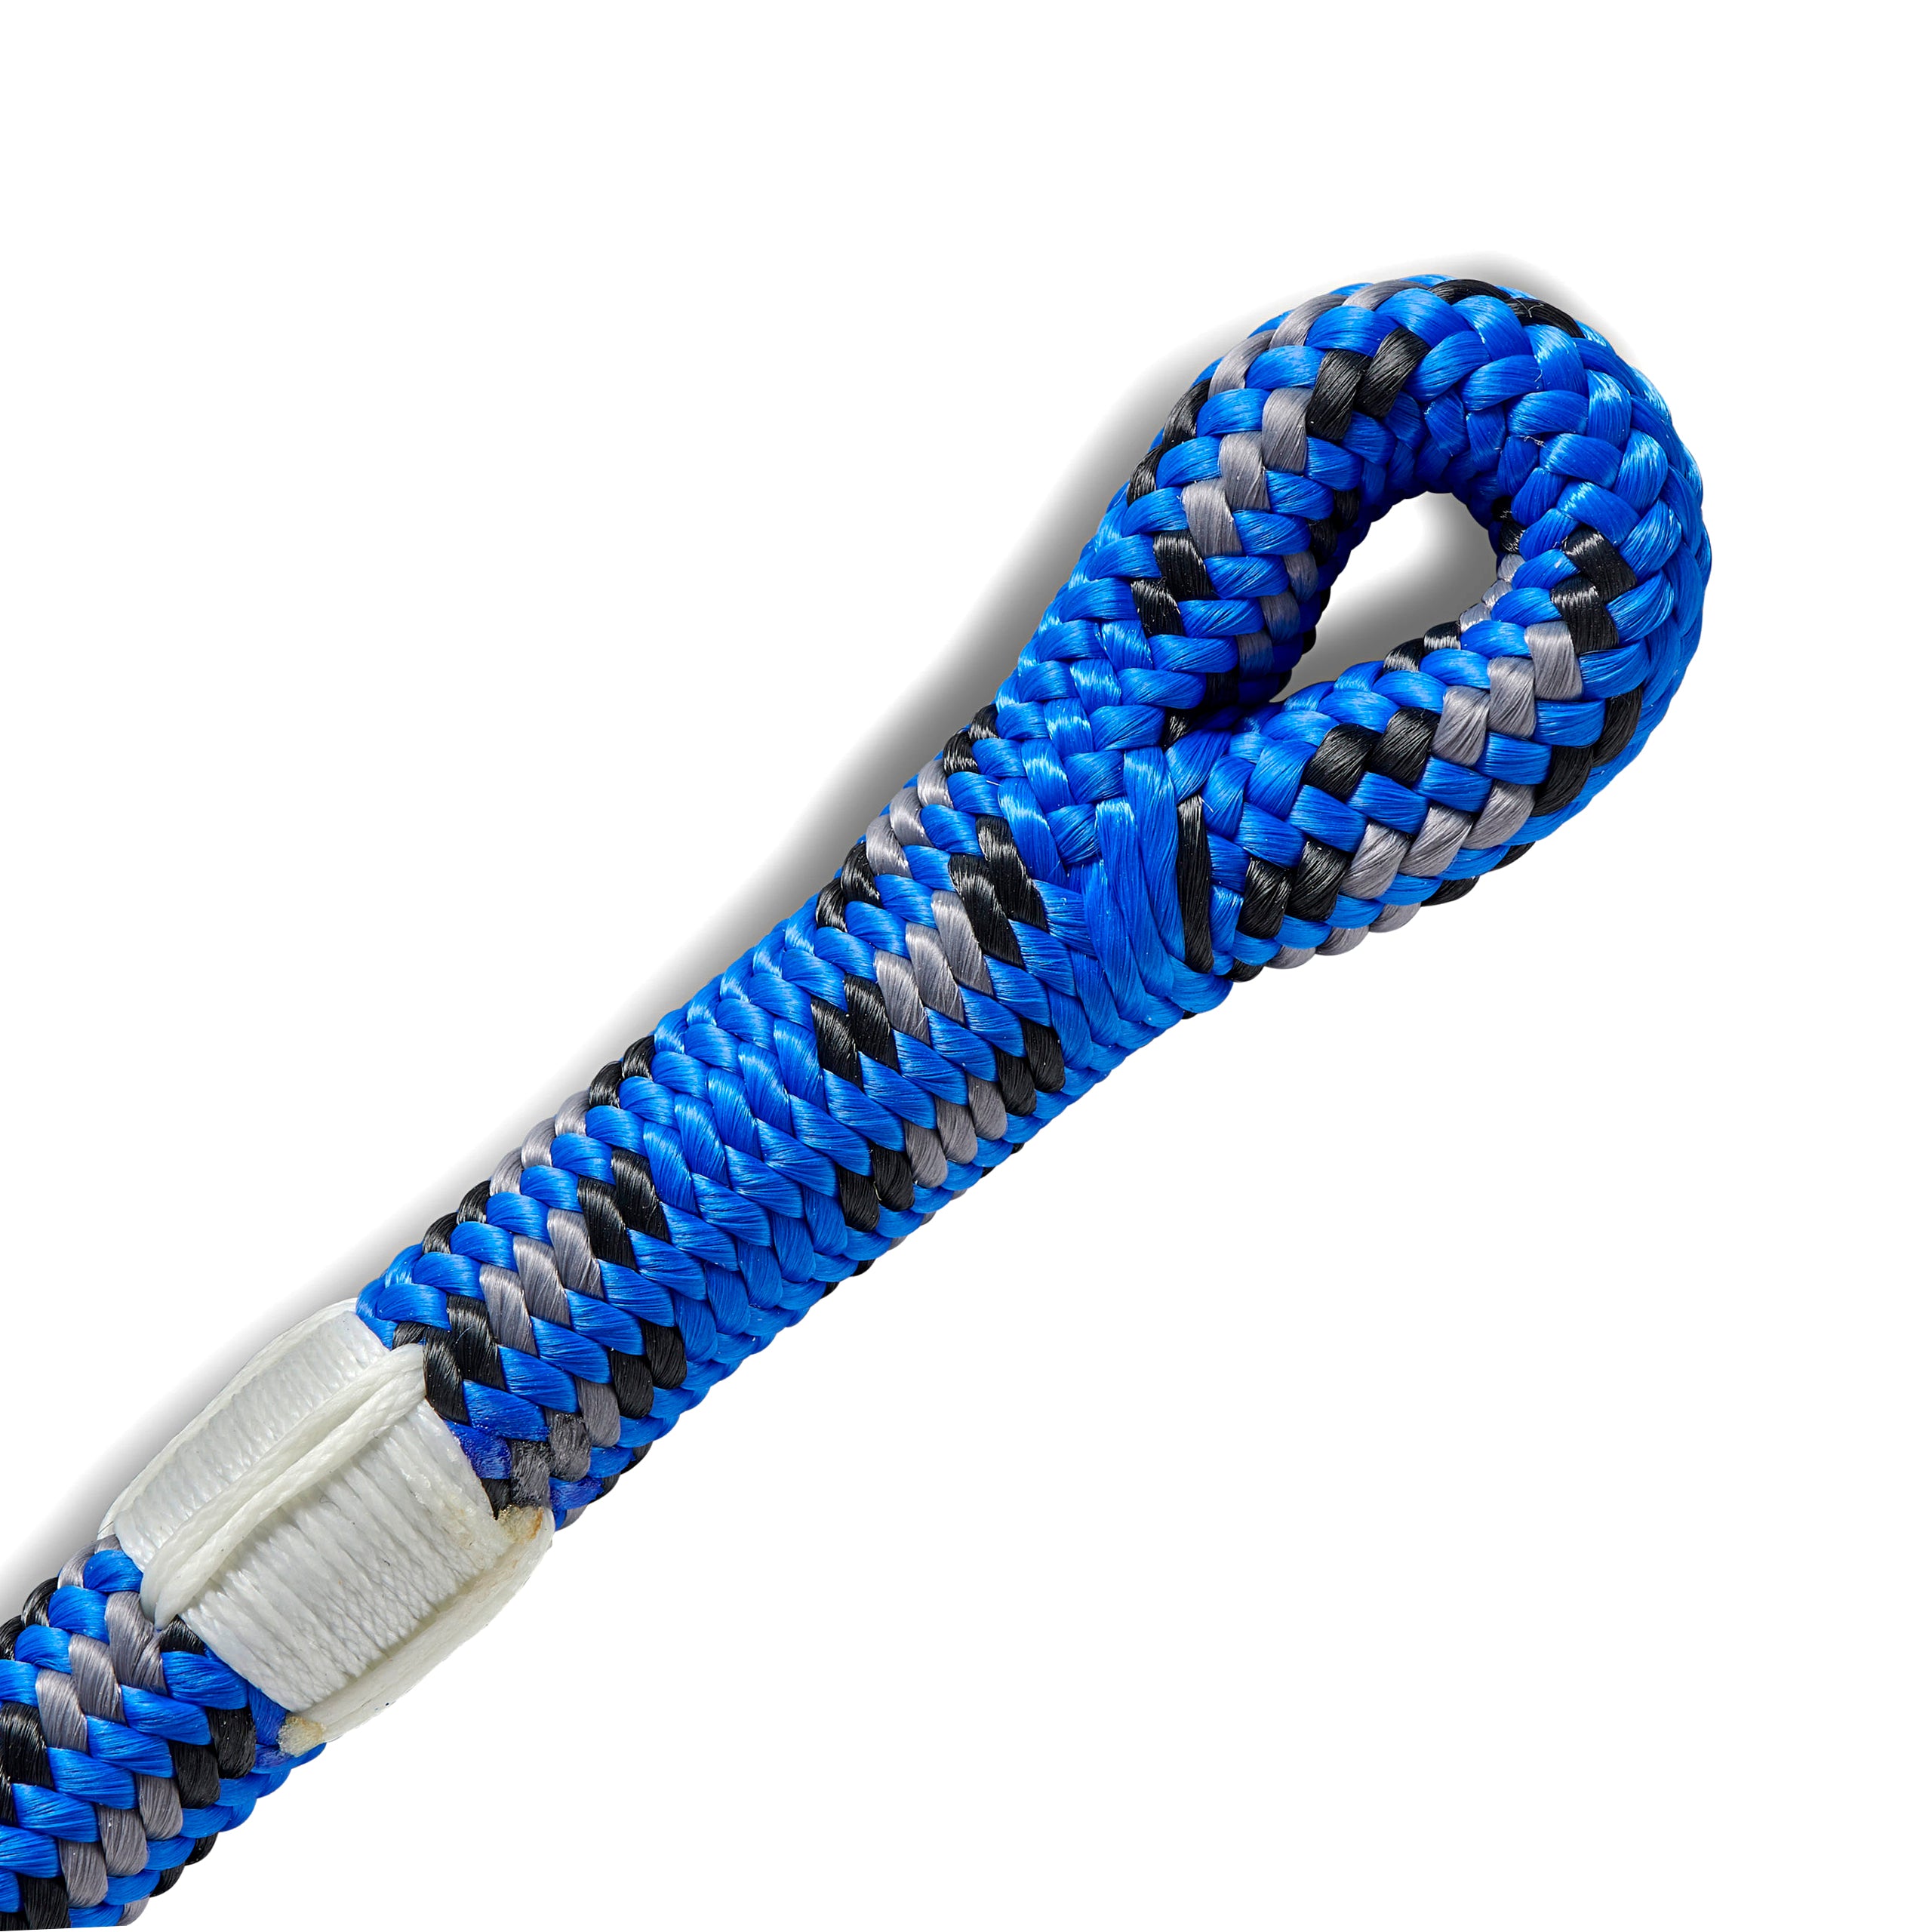 Donaghys Cougar Blue 11.7mm with Splice – LRV8 Rescue